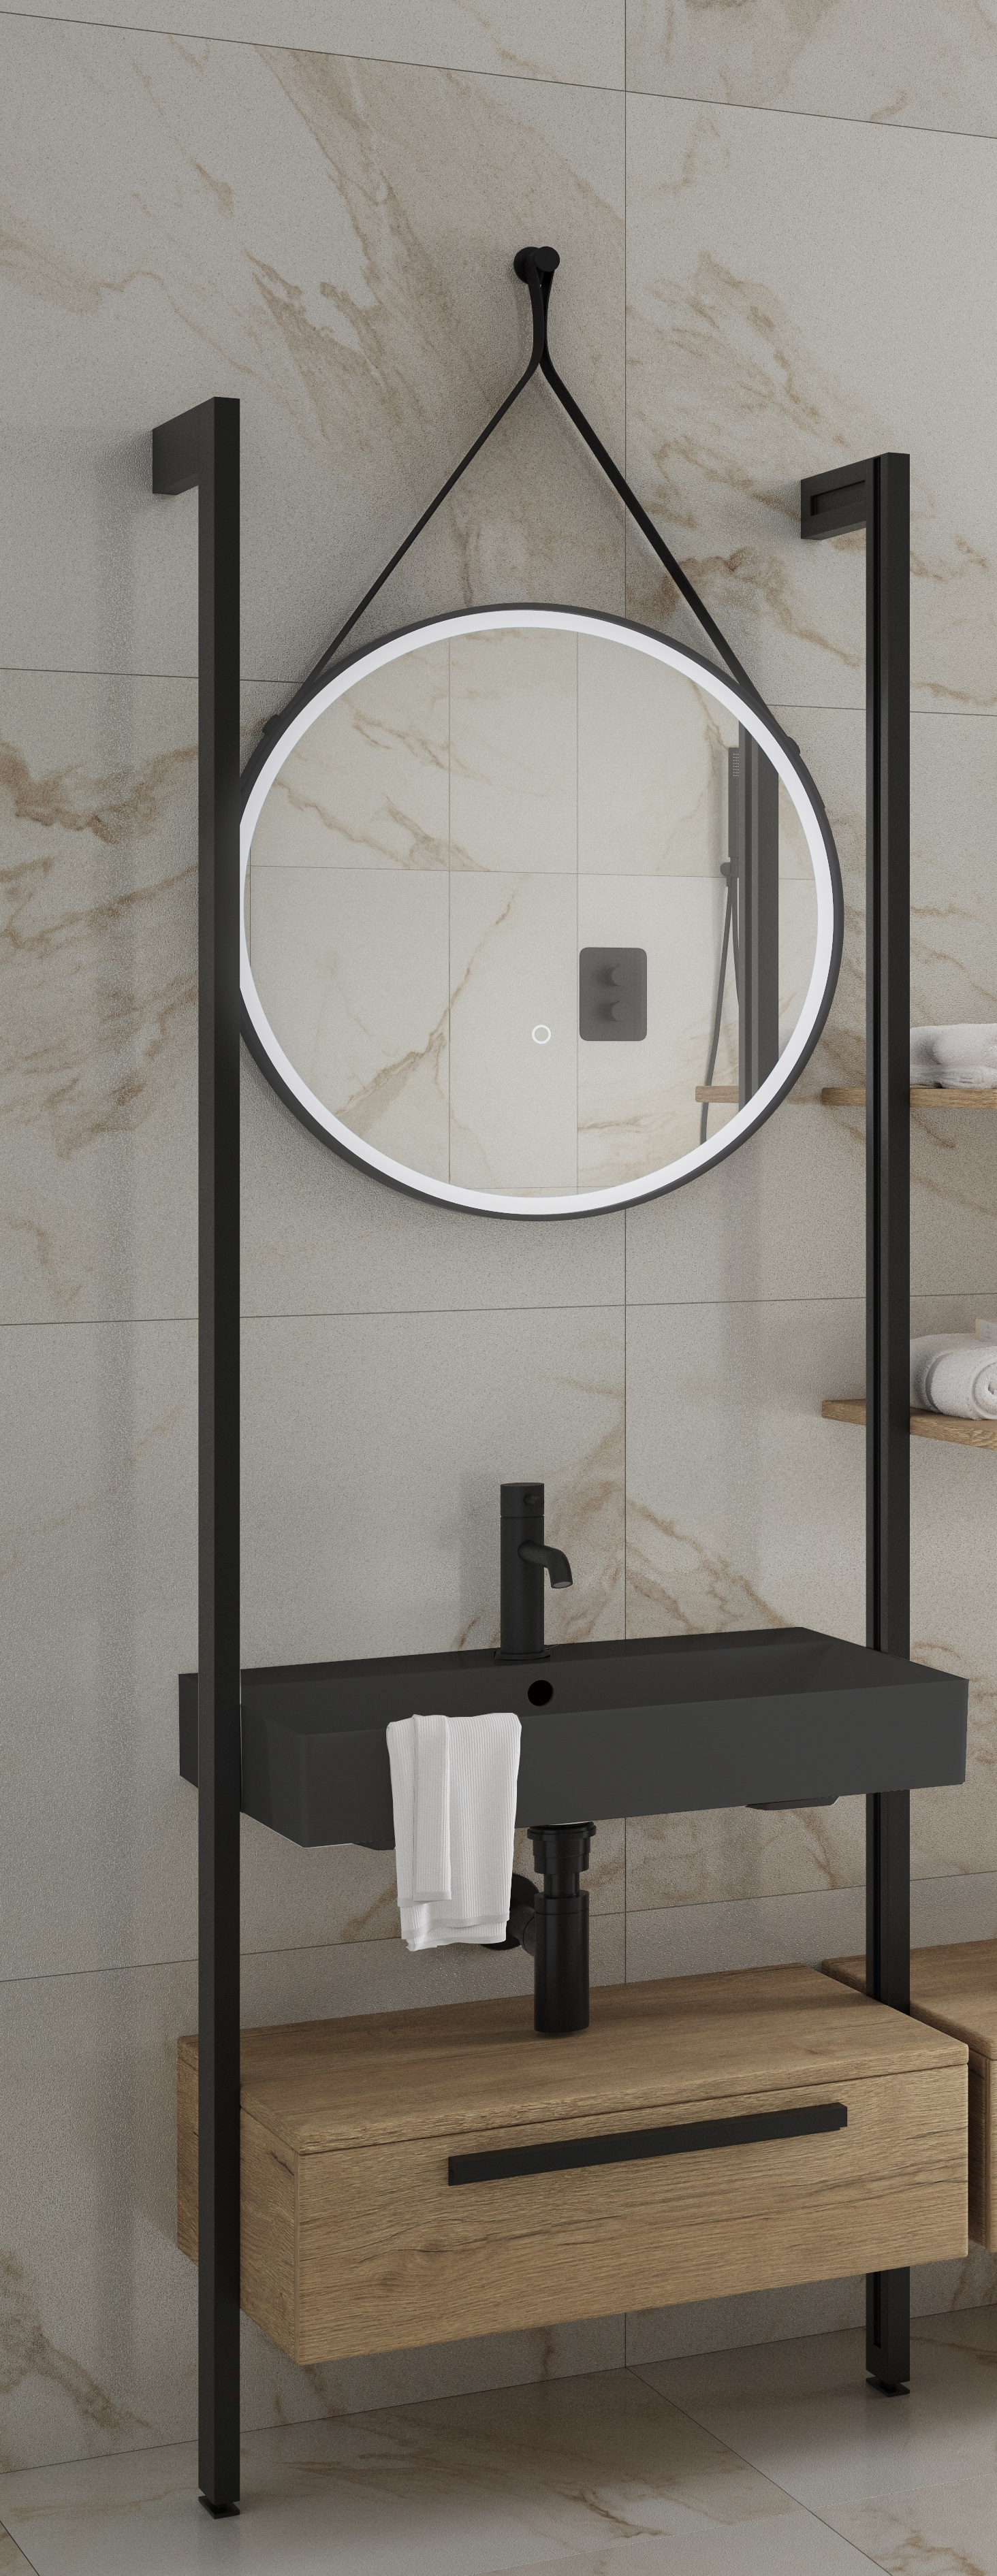 Wickes Rimini Wall System Vanity & Tower Unit Only with Black Basin - 1200mm